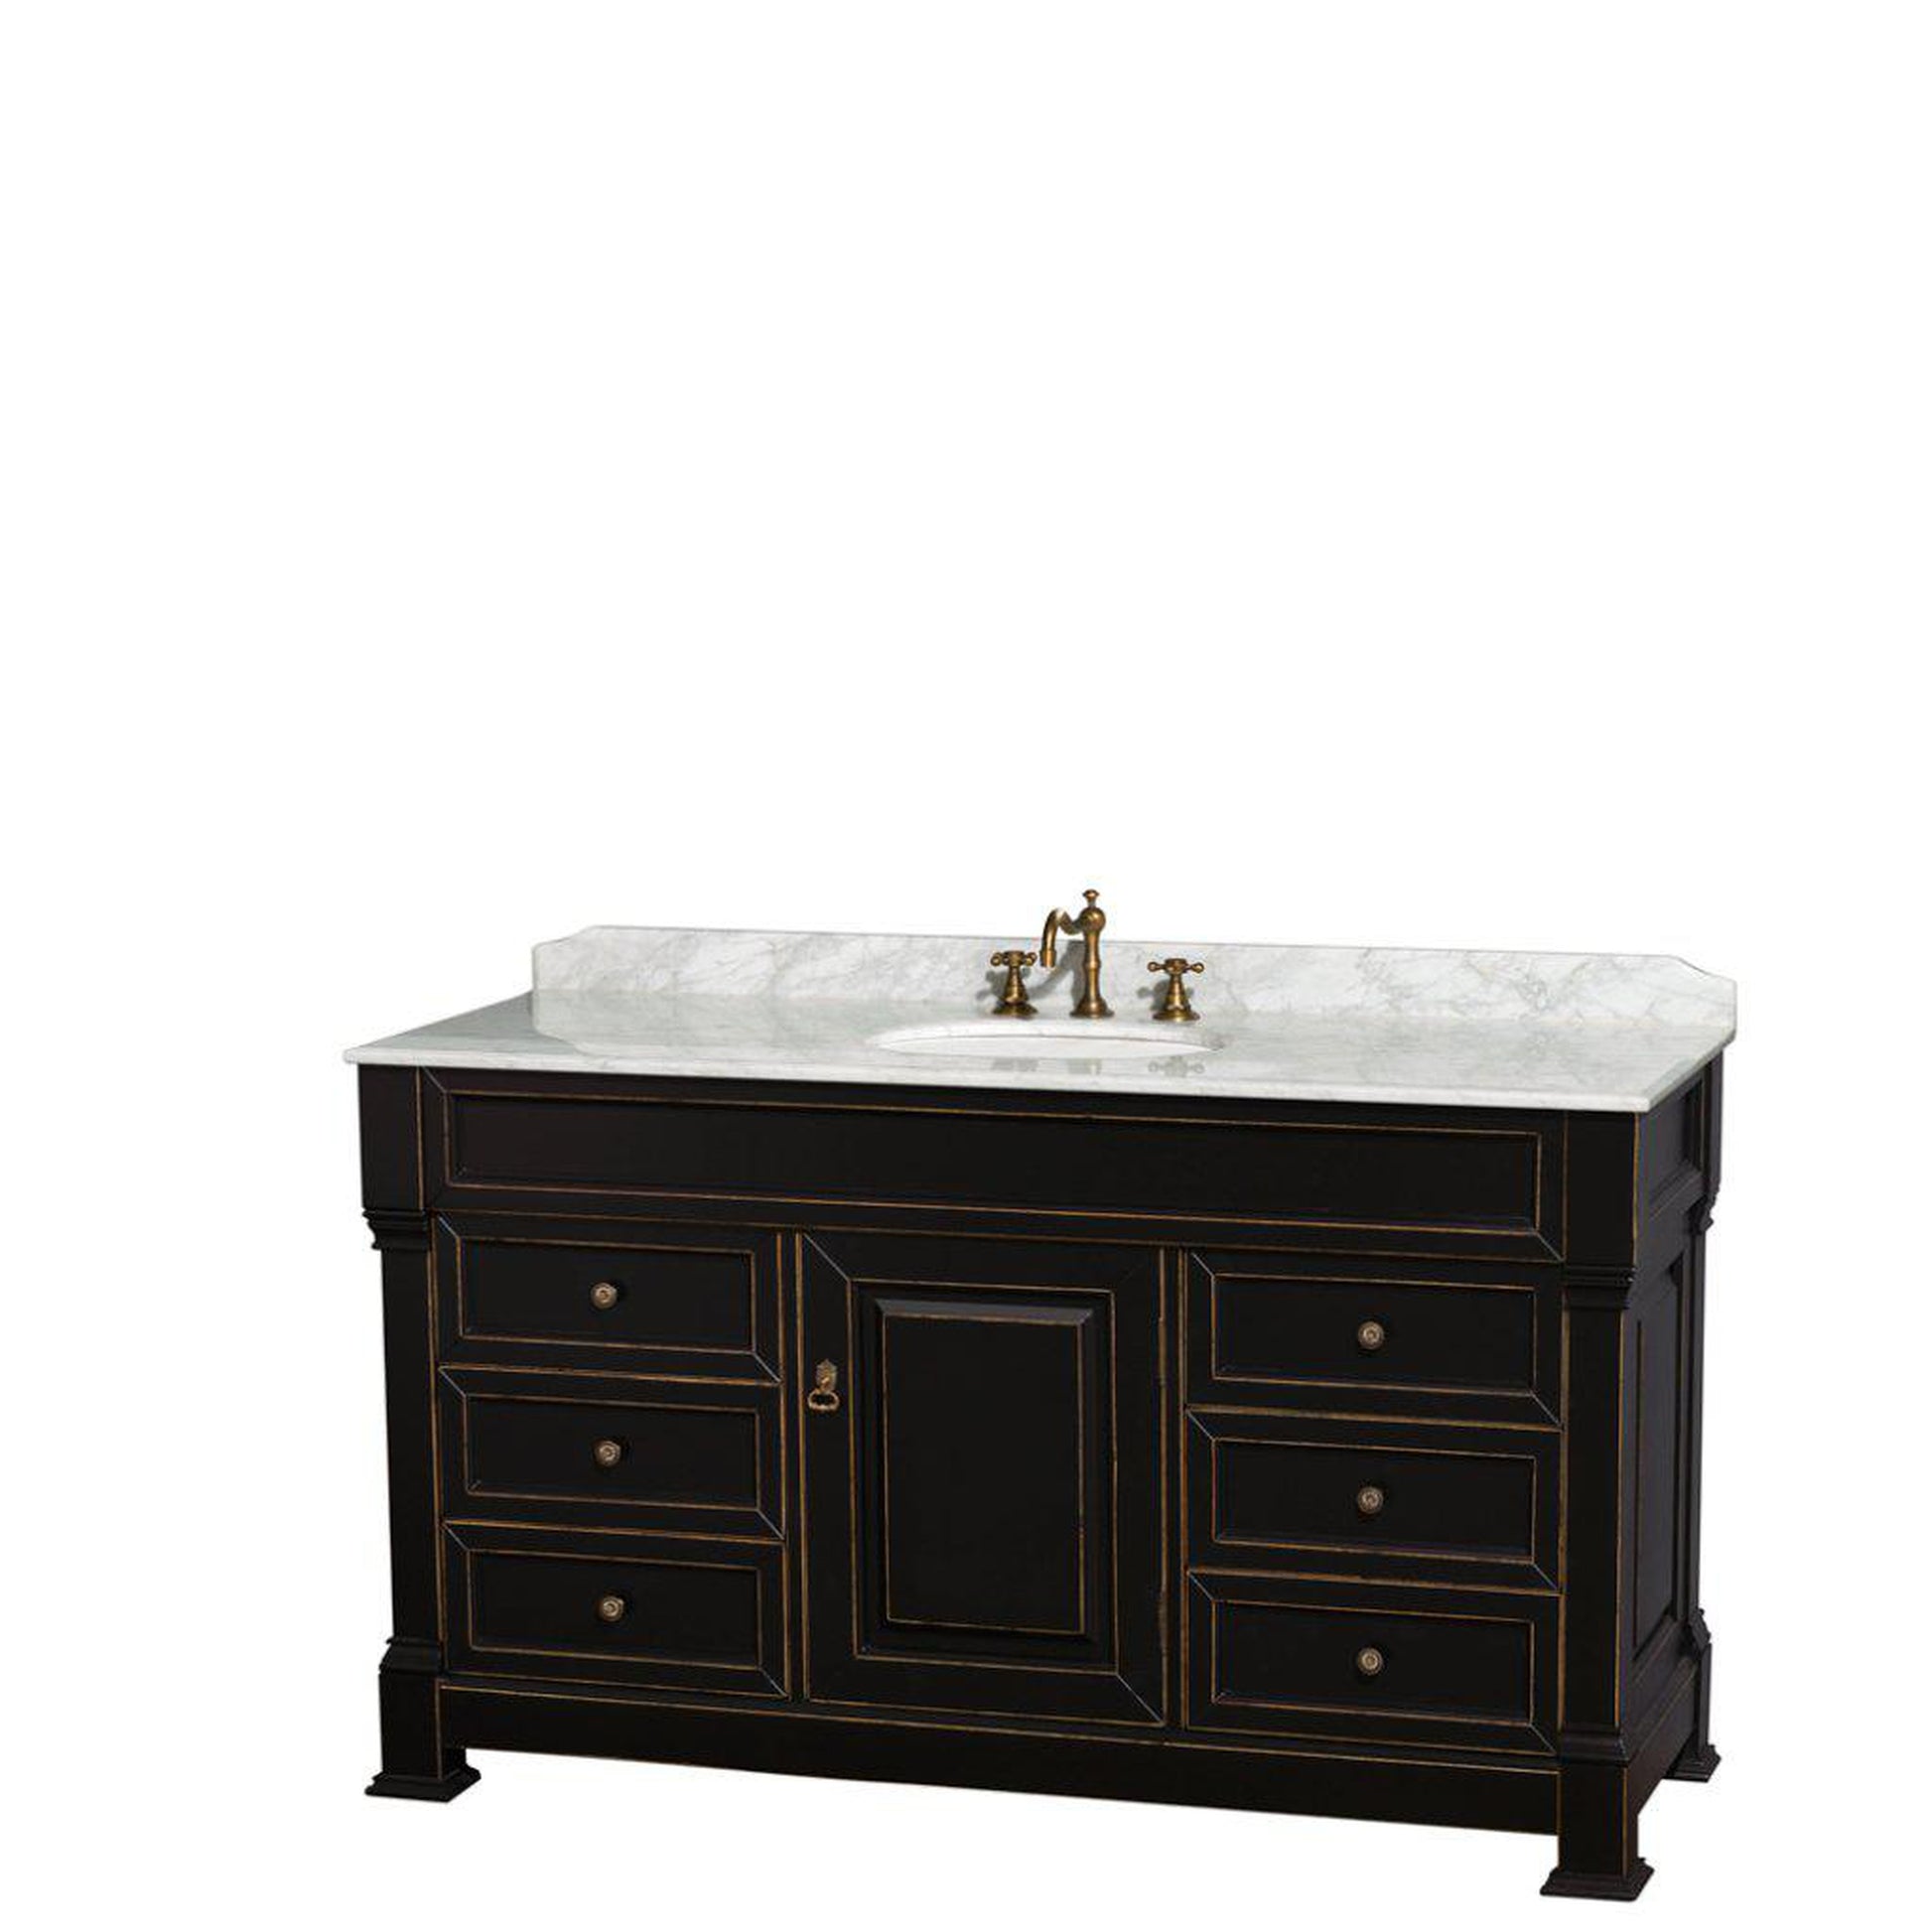 Wyndham Collection Andover 60" Single Bathroom Black Vanity Set With White Carrara Marble Countertop And Undermount Oval Sink, And No Mirror